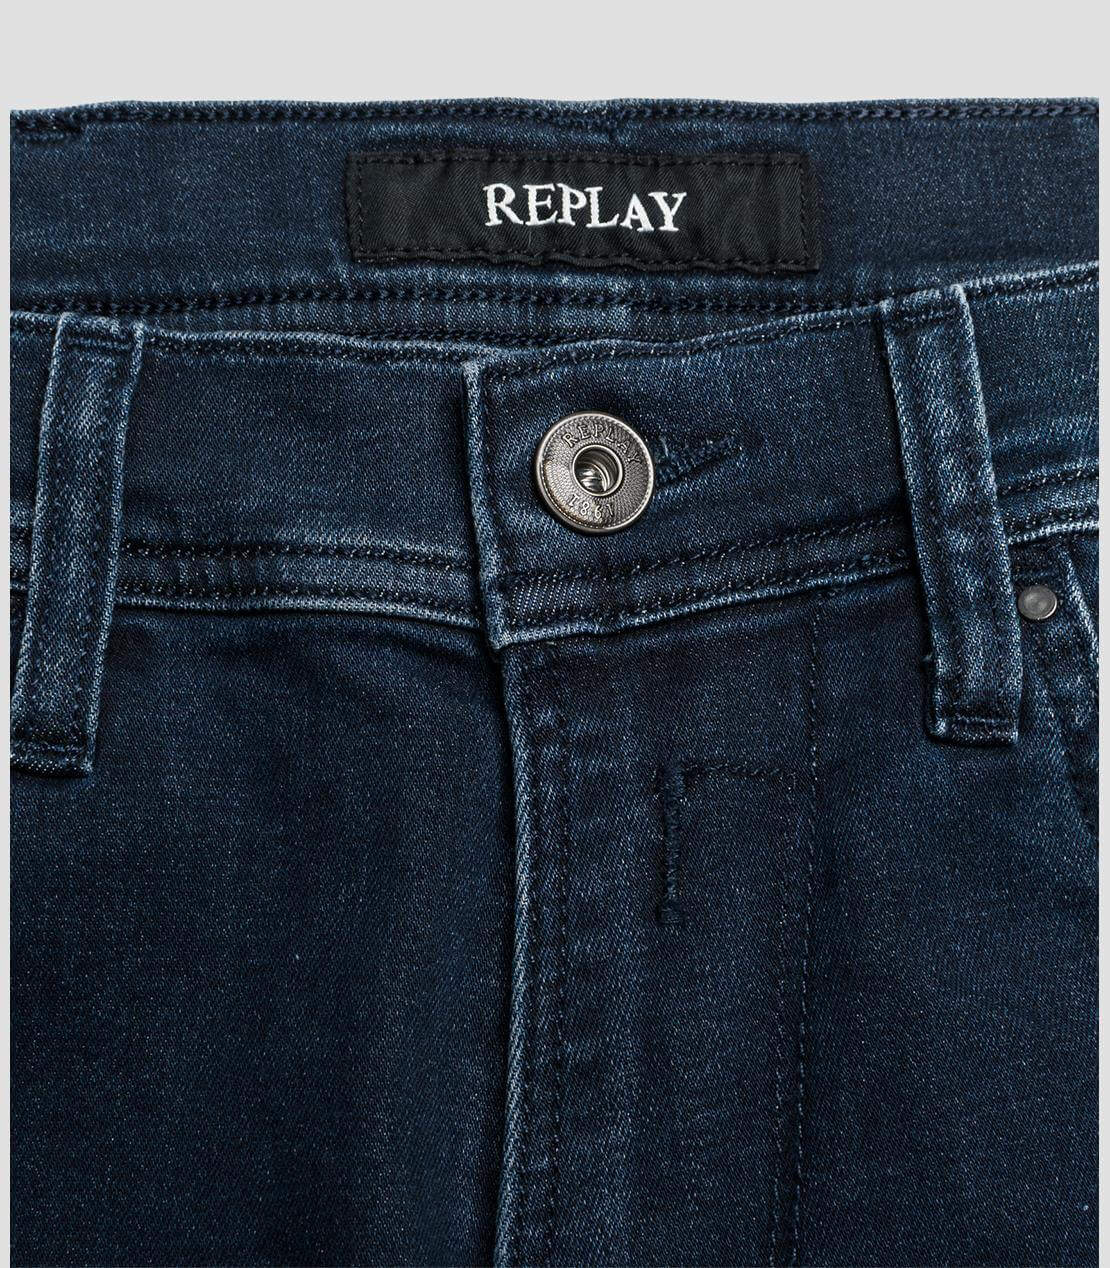 REPLAY JEANS MA931 41A 603 007-Libas Trendy Fashion Store